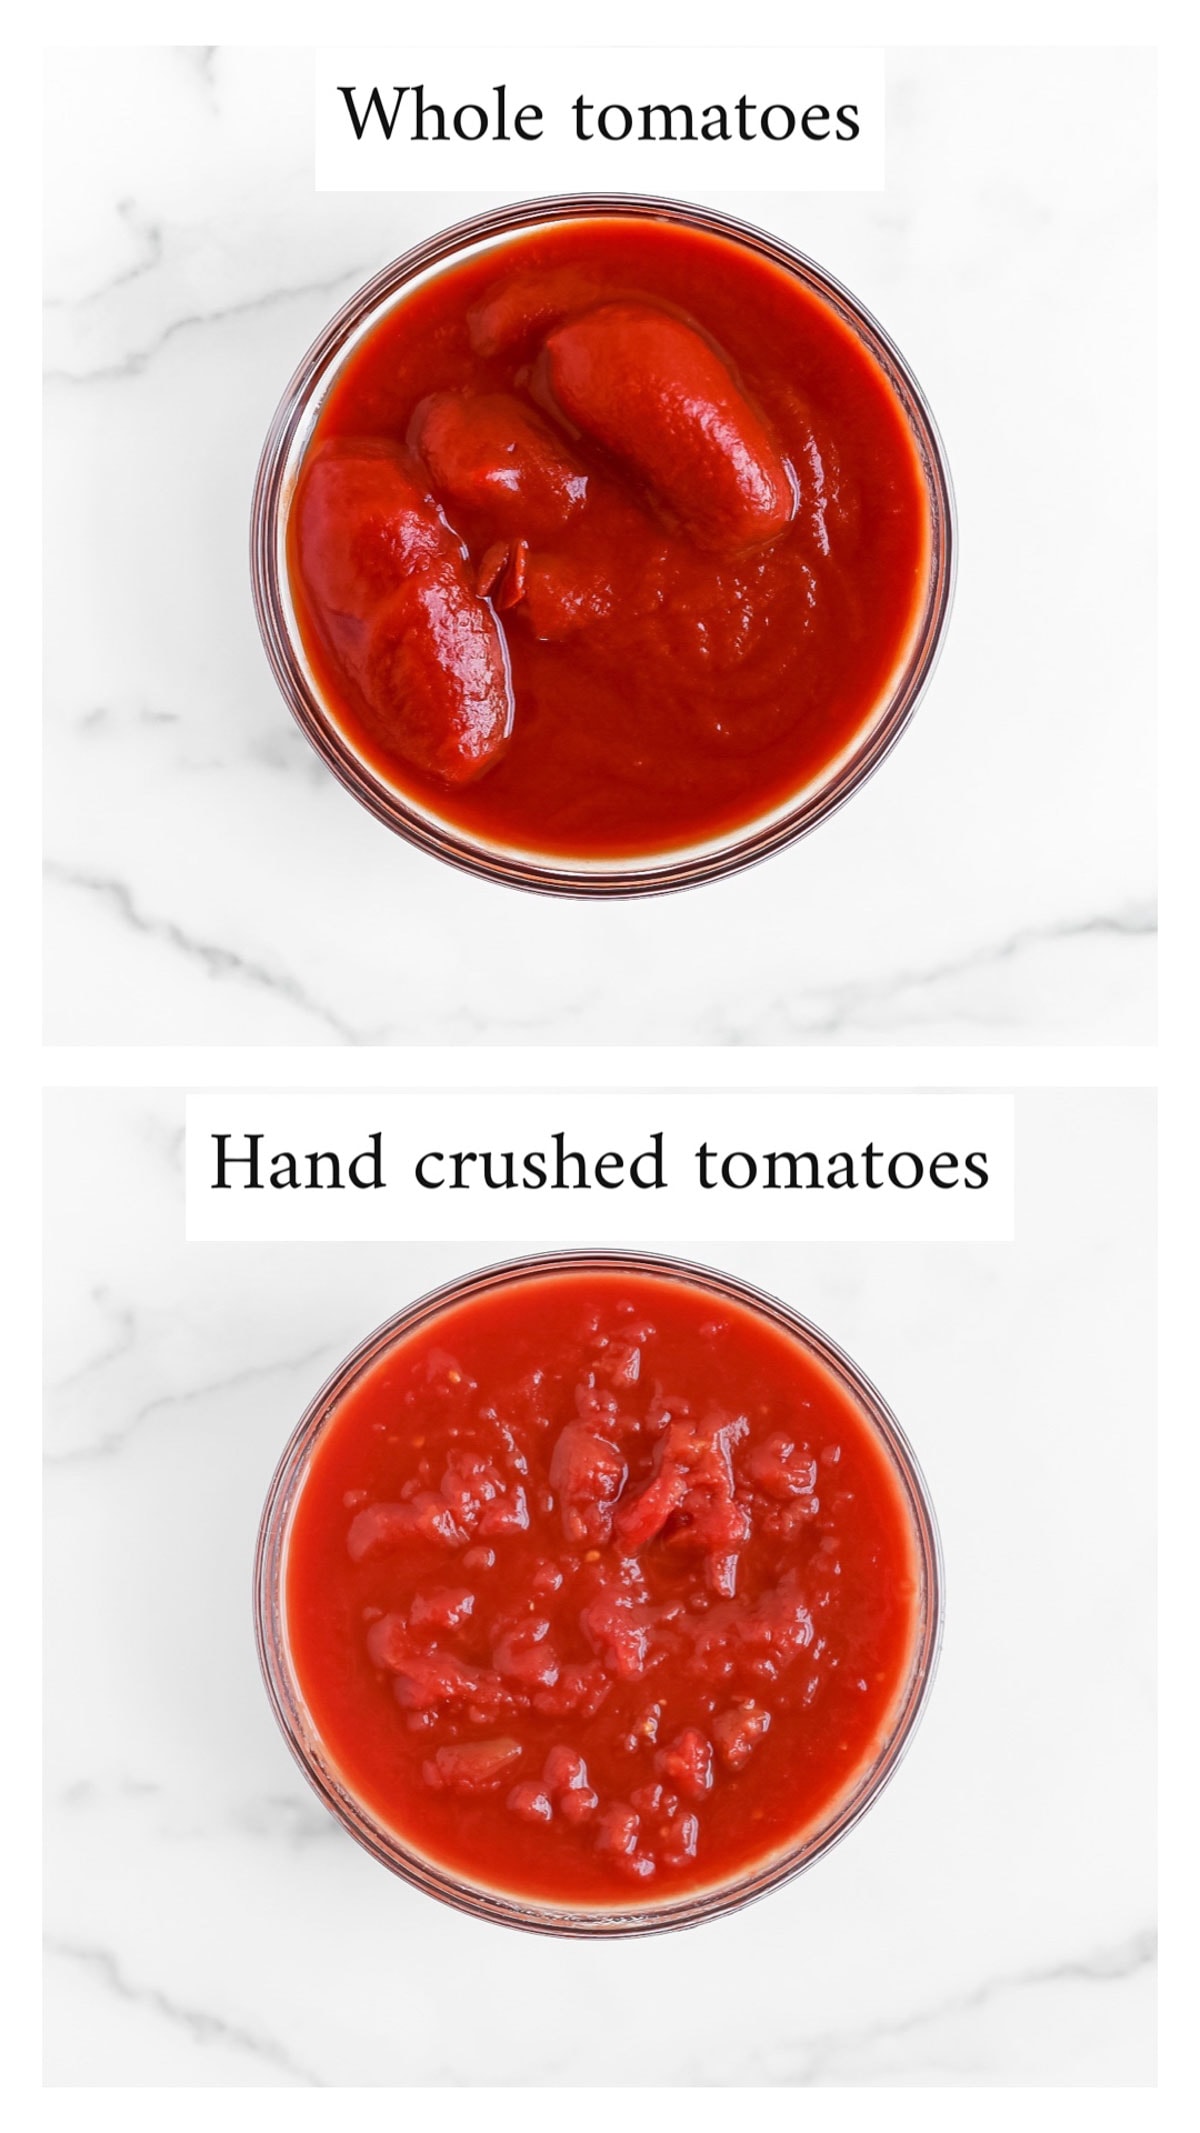 Two pictures of bowls, the top bowl is label "whole tomatoes" and is filled with several tomatoes in sauce. The second is labeled, "hand crushed tomatoes" and shows crushed tomatoes in a bowl.